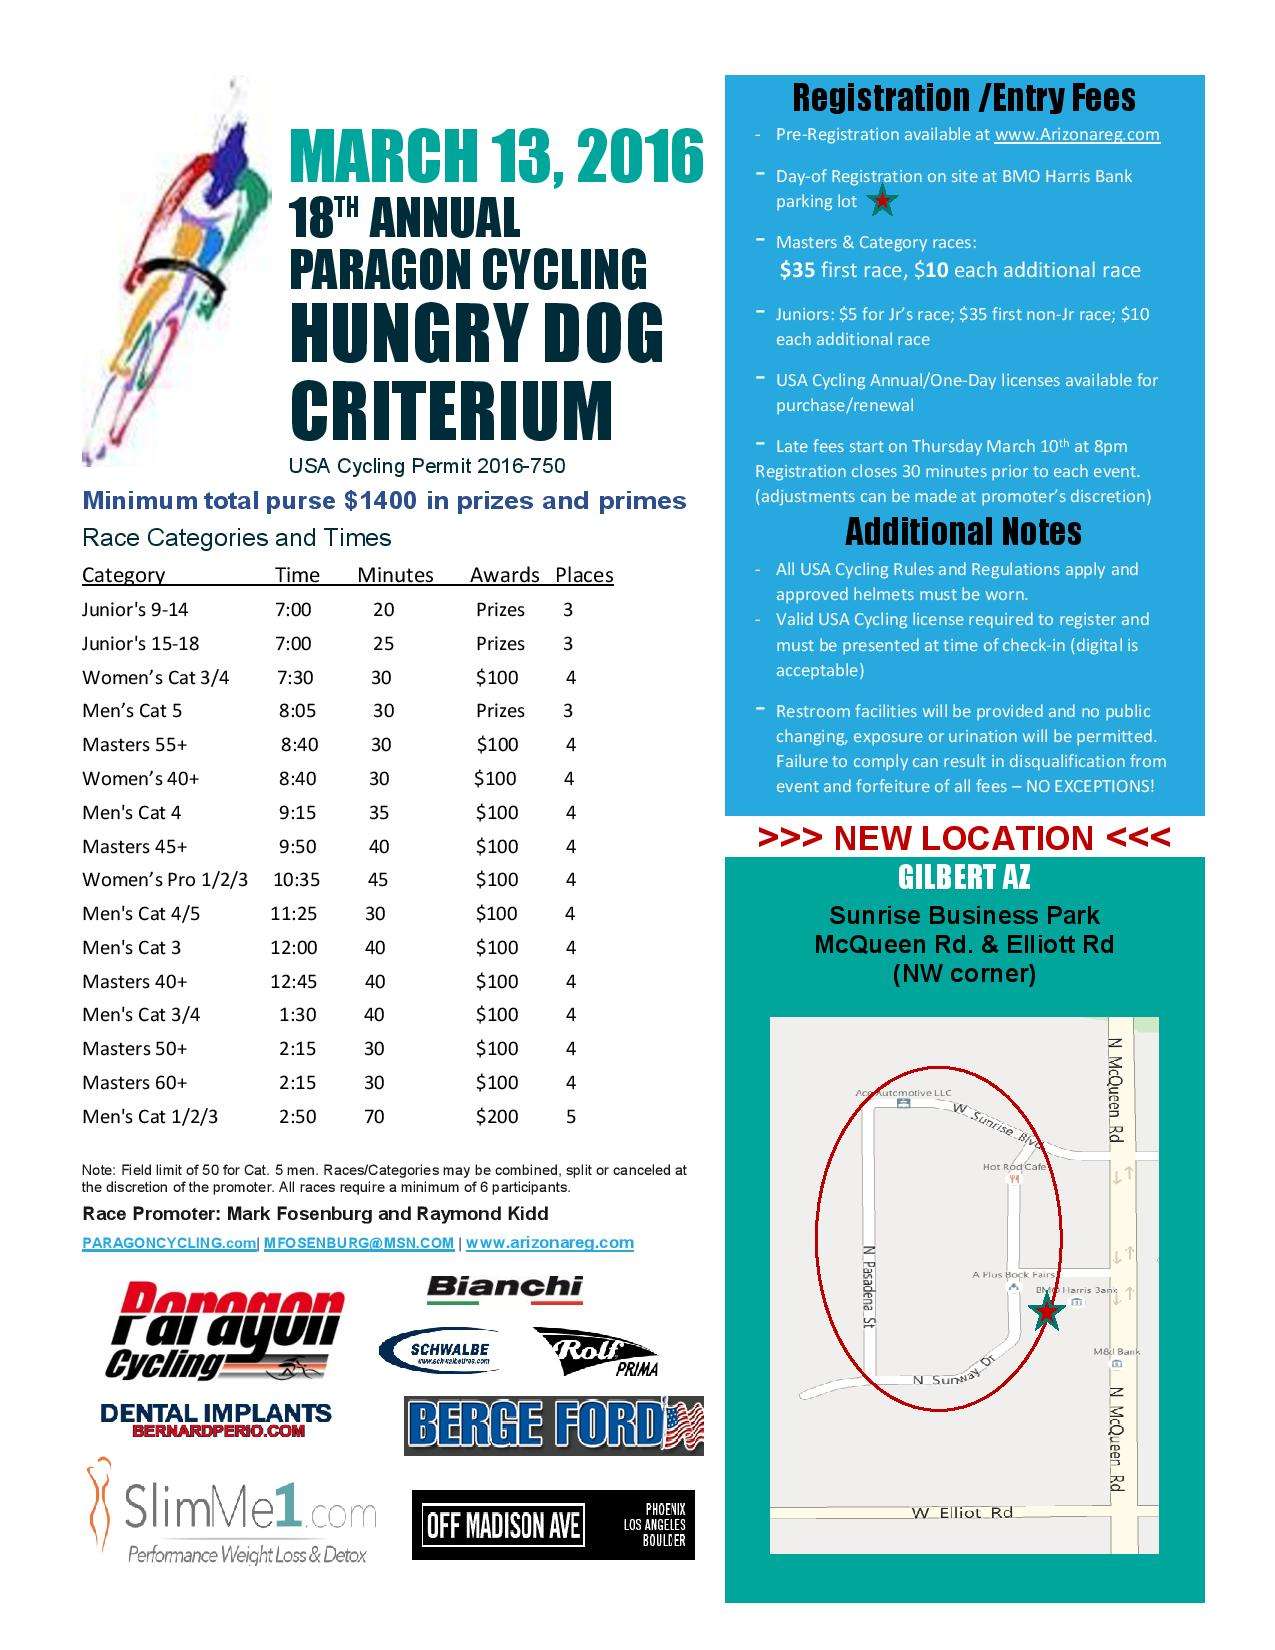 Hungry Dog criterium flyer, 2016